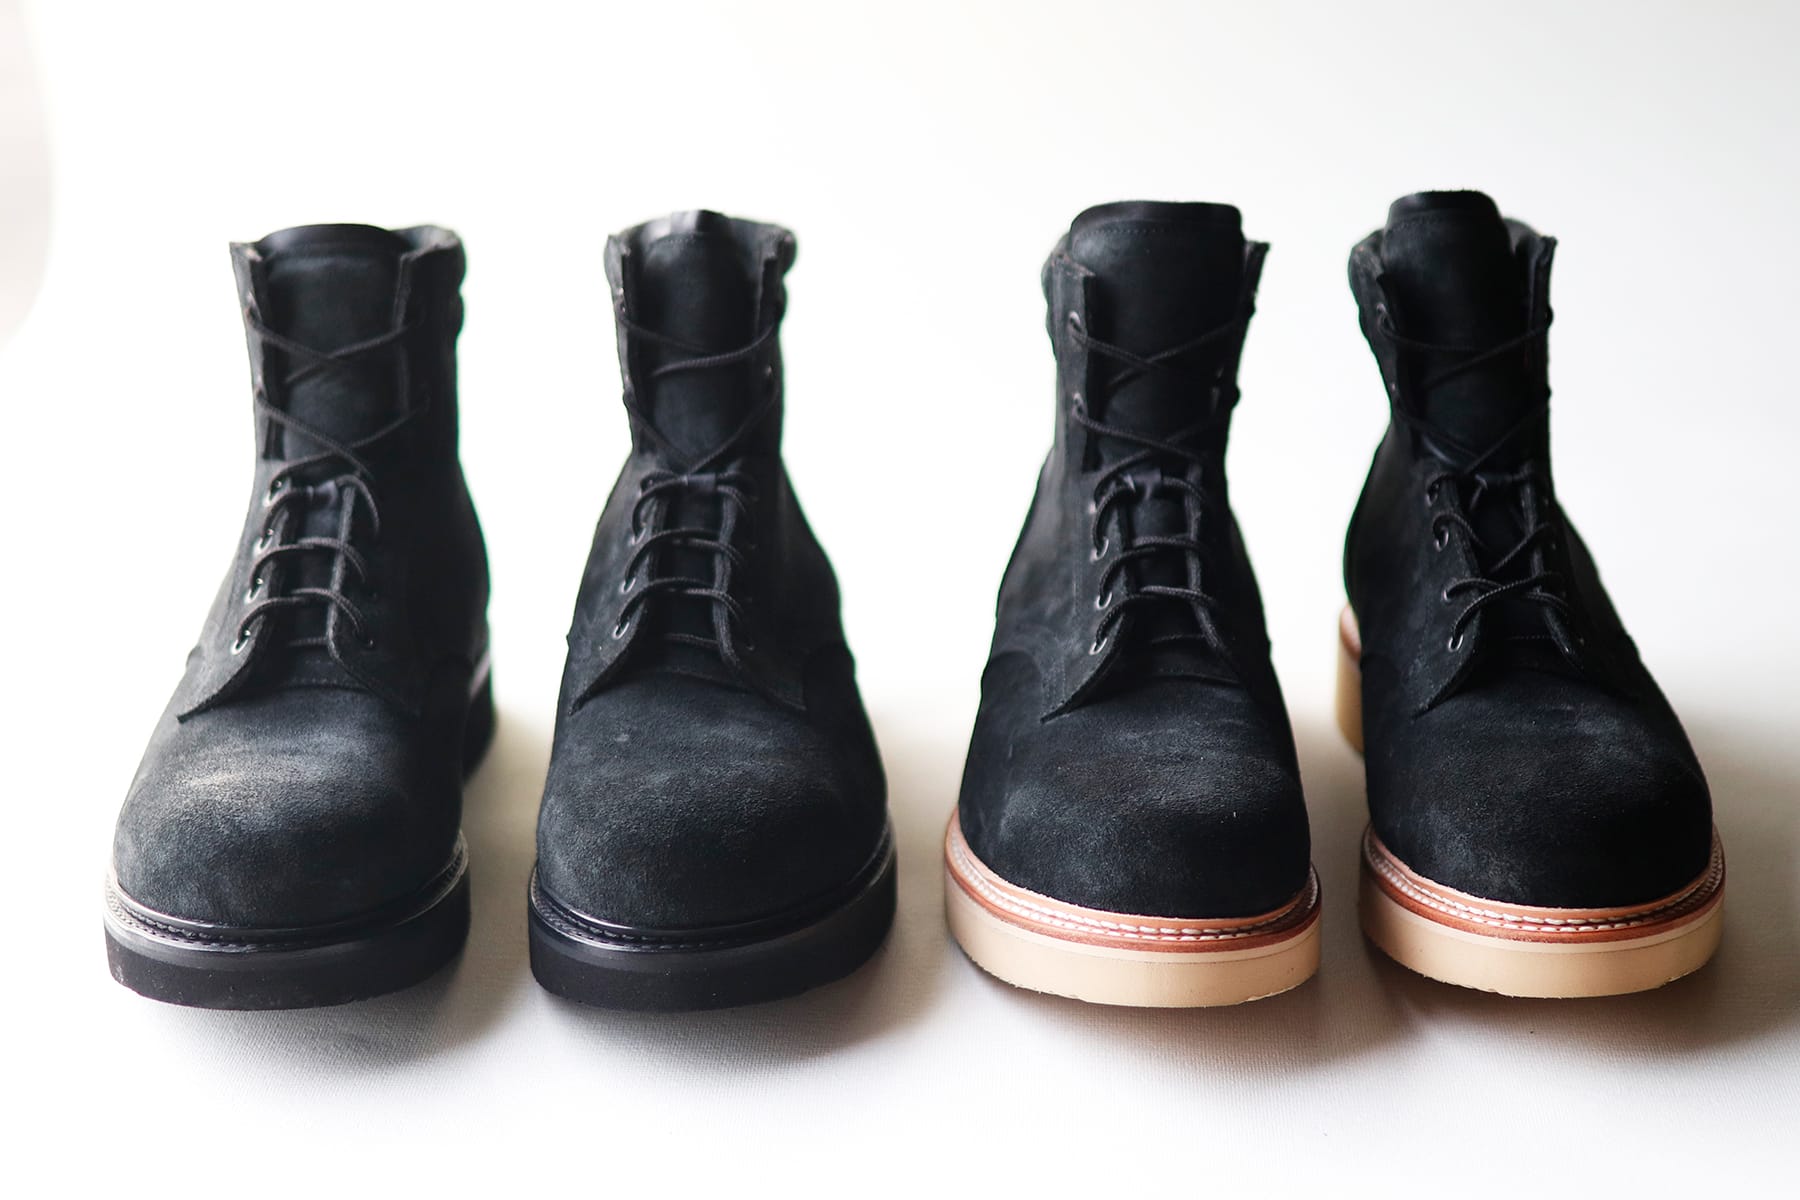 MADE IN GM JAPANより新定番モデルLace Up Bootsがローンチ | Hypebeast.JP